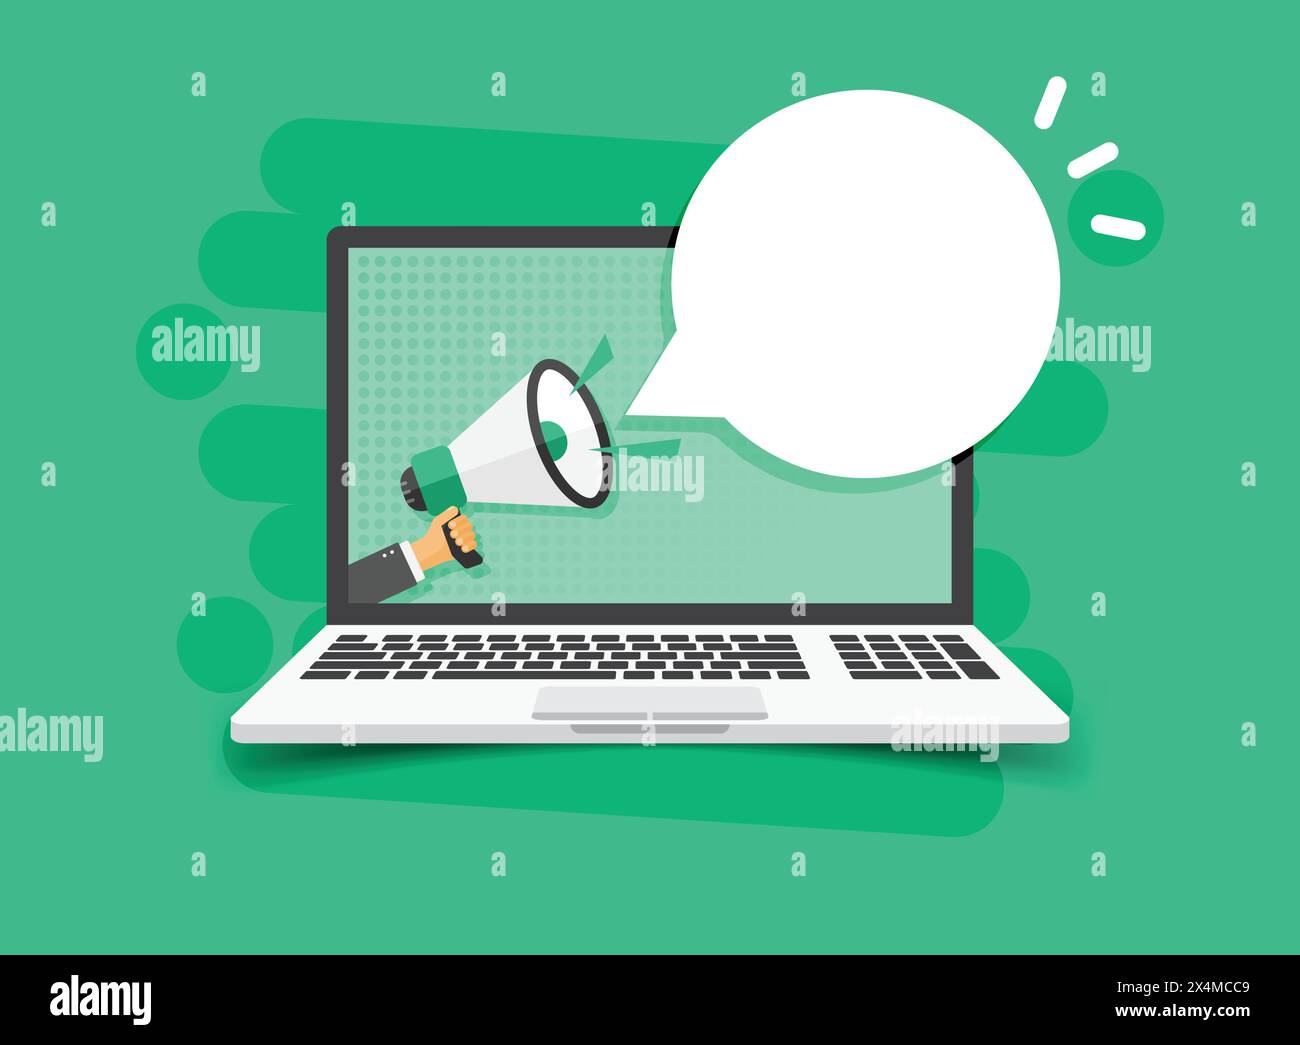 Laptop notification icon in flat style. Computer vector illustration on isolated background. Megaphone reminder sign business concept. Stock Vector